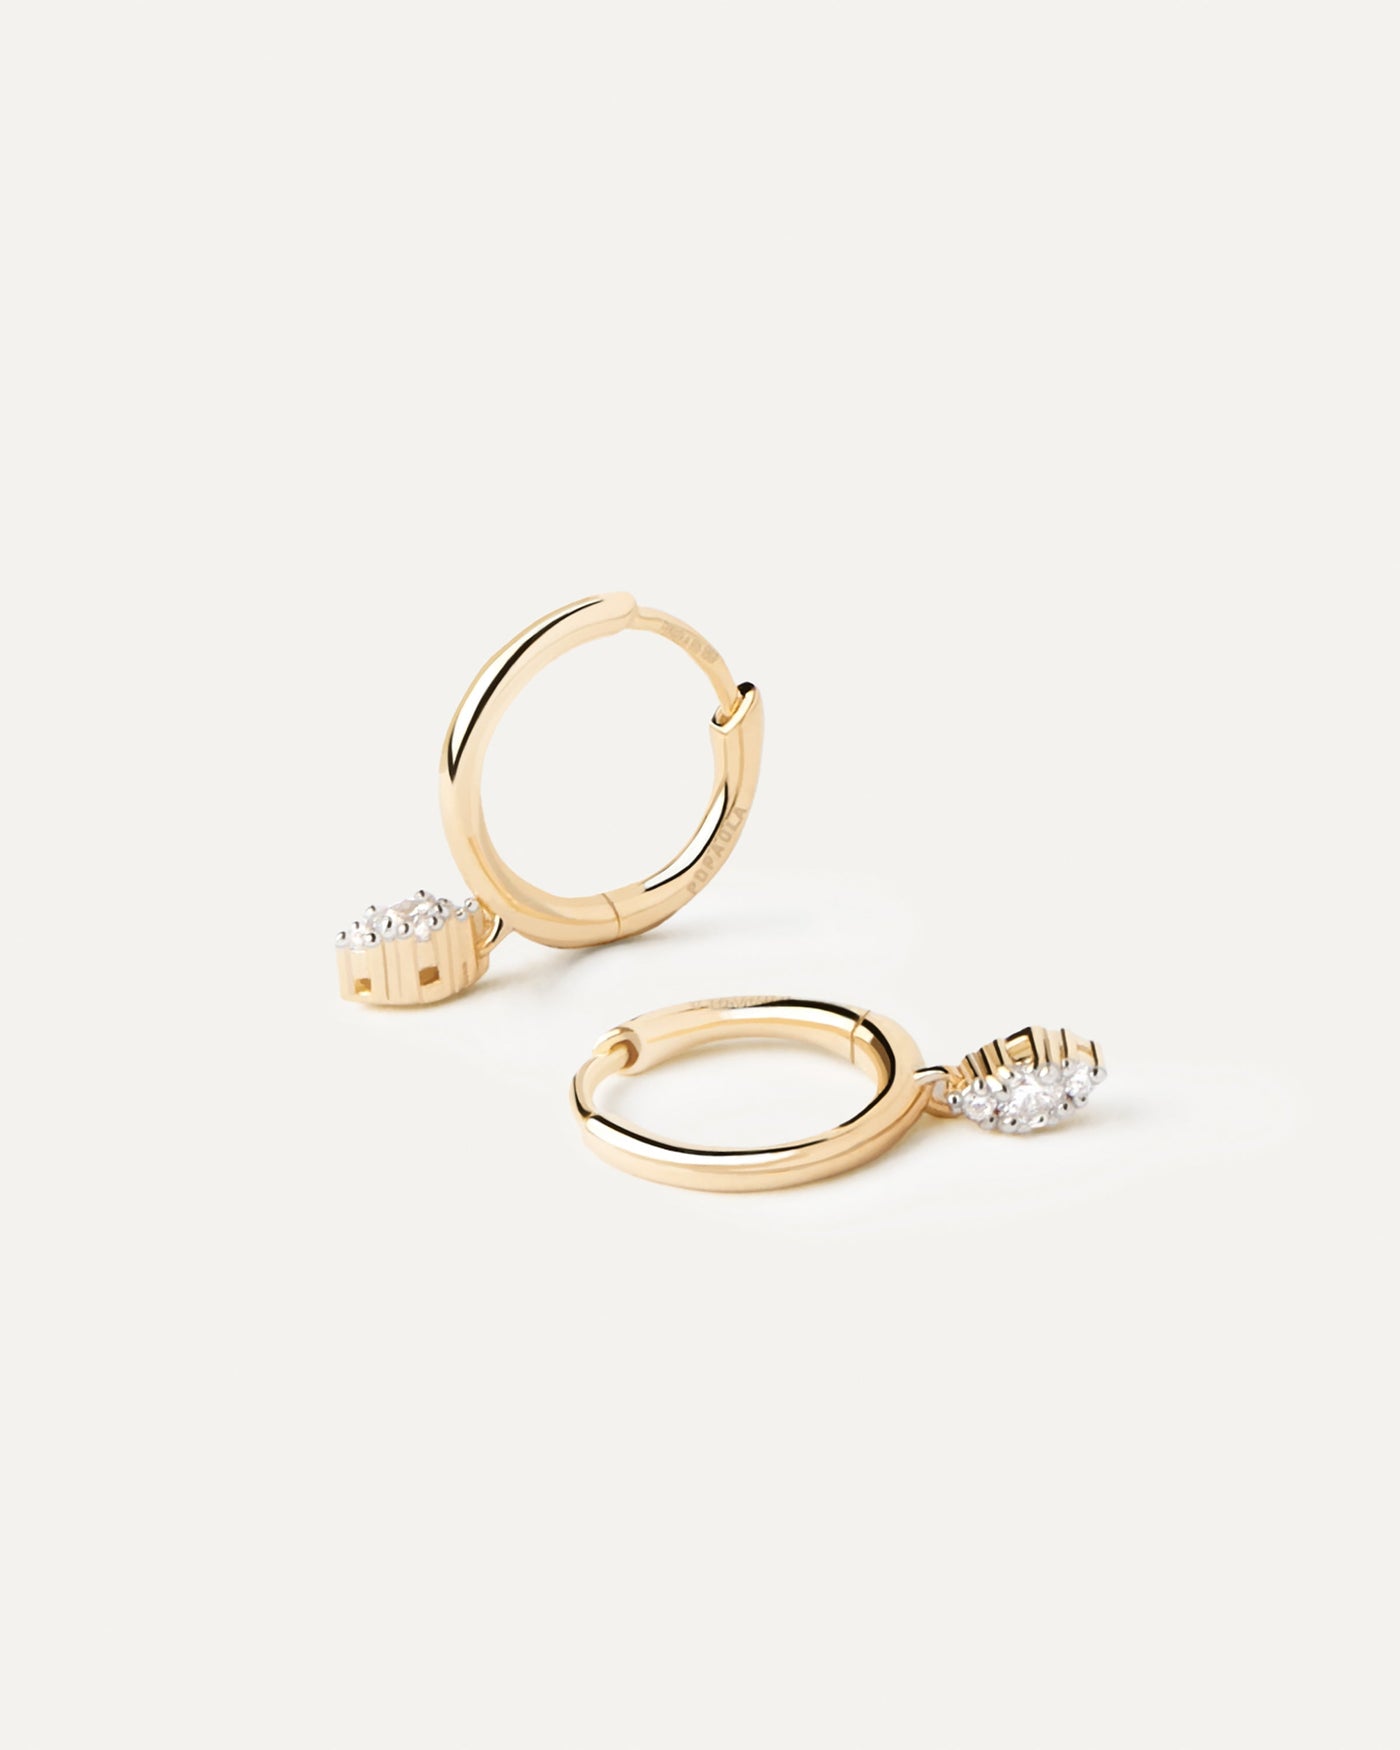 2024 Selection | Diamonds And Gold Emi Hoops. Yellow gold hoops with small diamonds pendant of 0.08 carats each earring. Get the latest arrival from PDPAOLA. Place your order safely and get this Best Seller. Free Shipping.